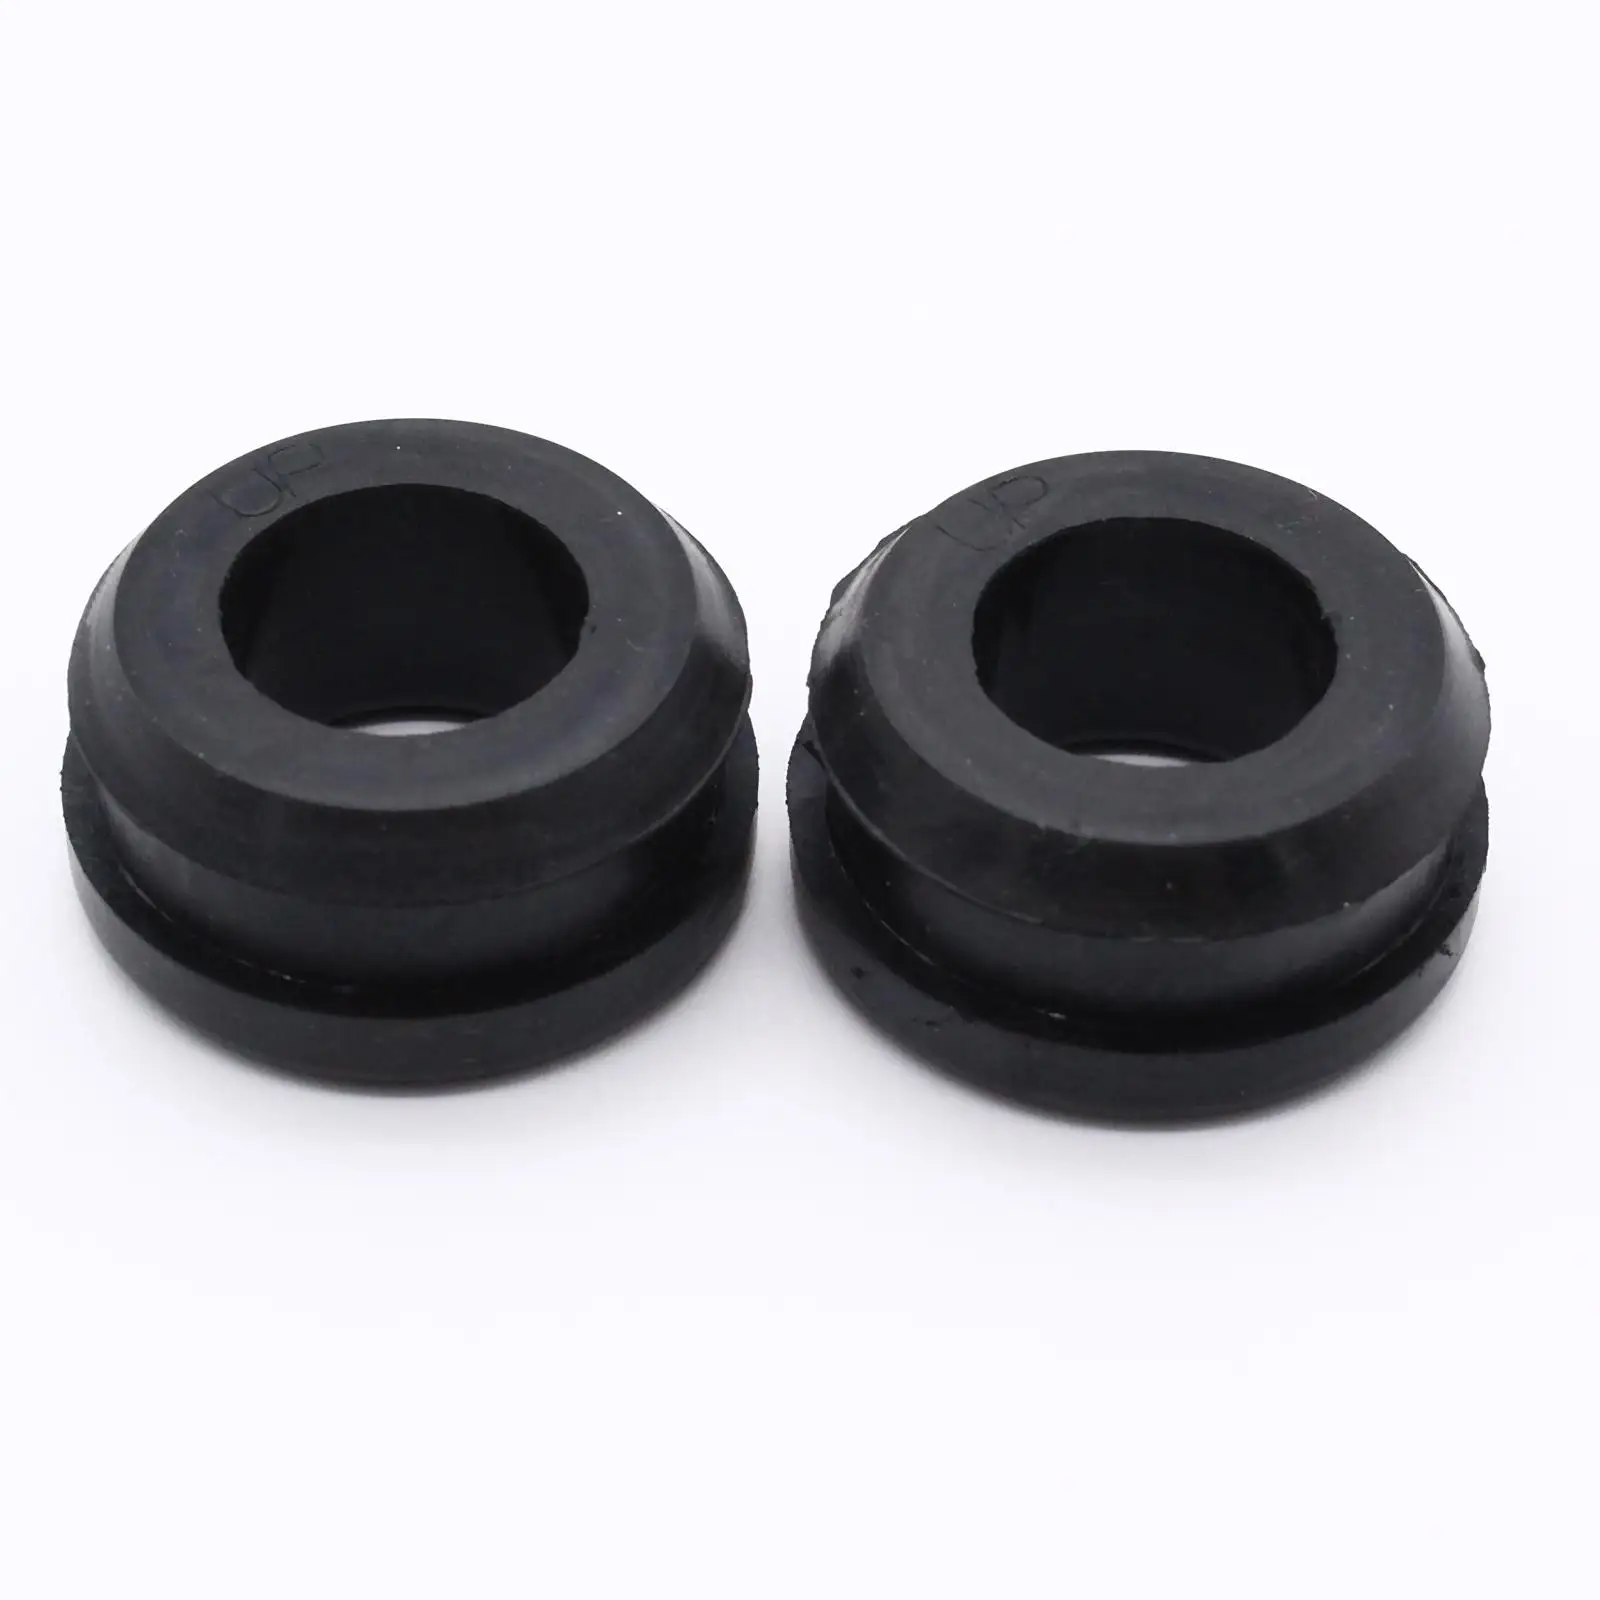 2 Pieces Rubber Pcv Breather Grommets O.D. 1 1/4